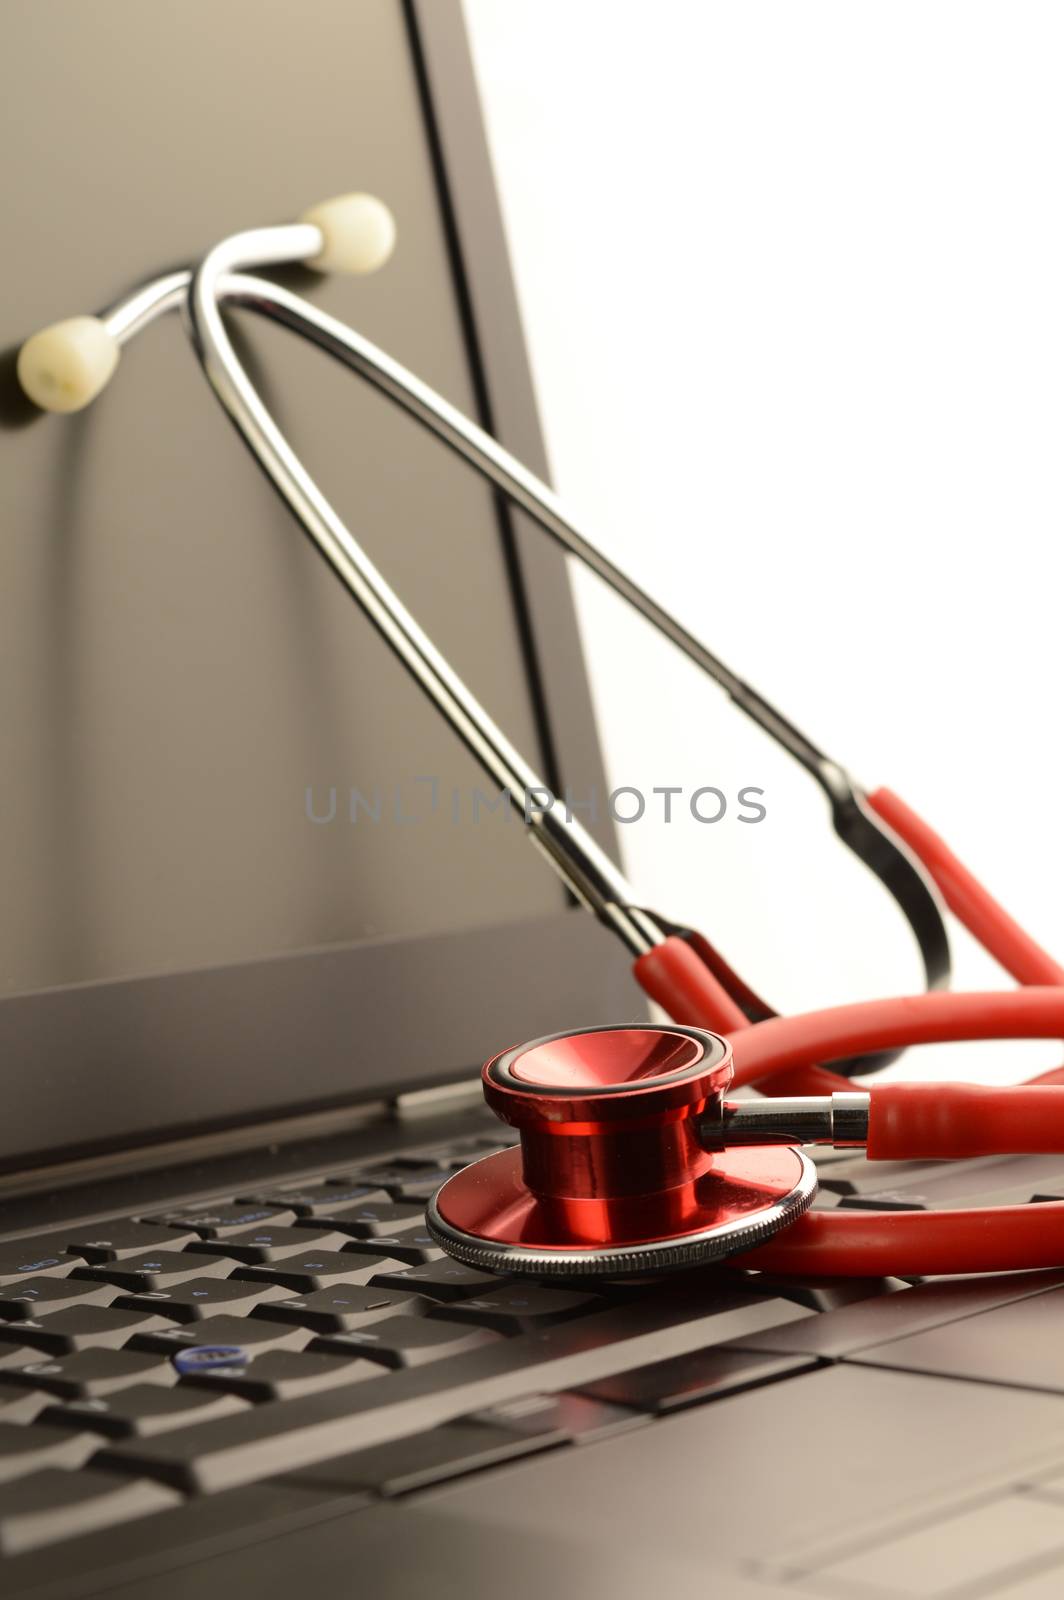 A stethoscope on a laptop for online healthcare services.